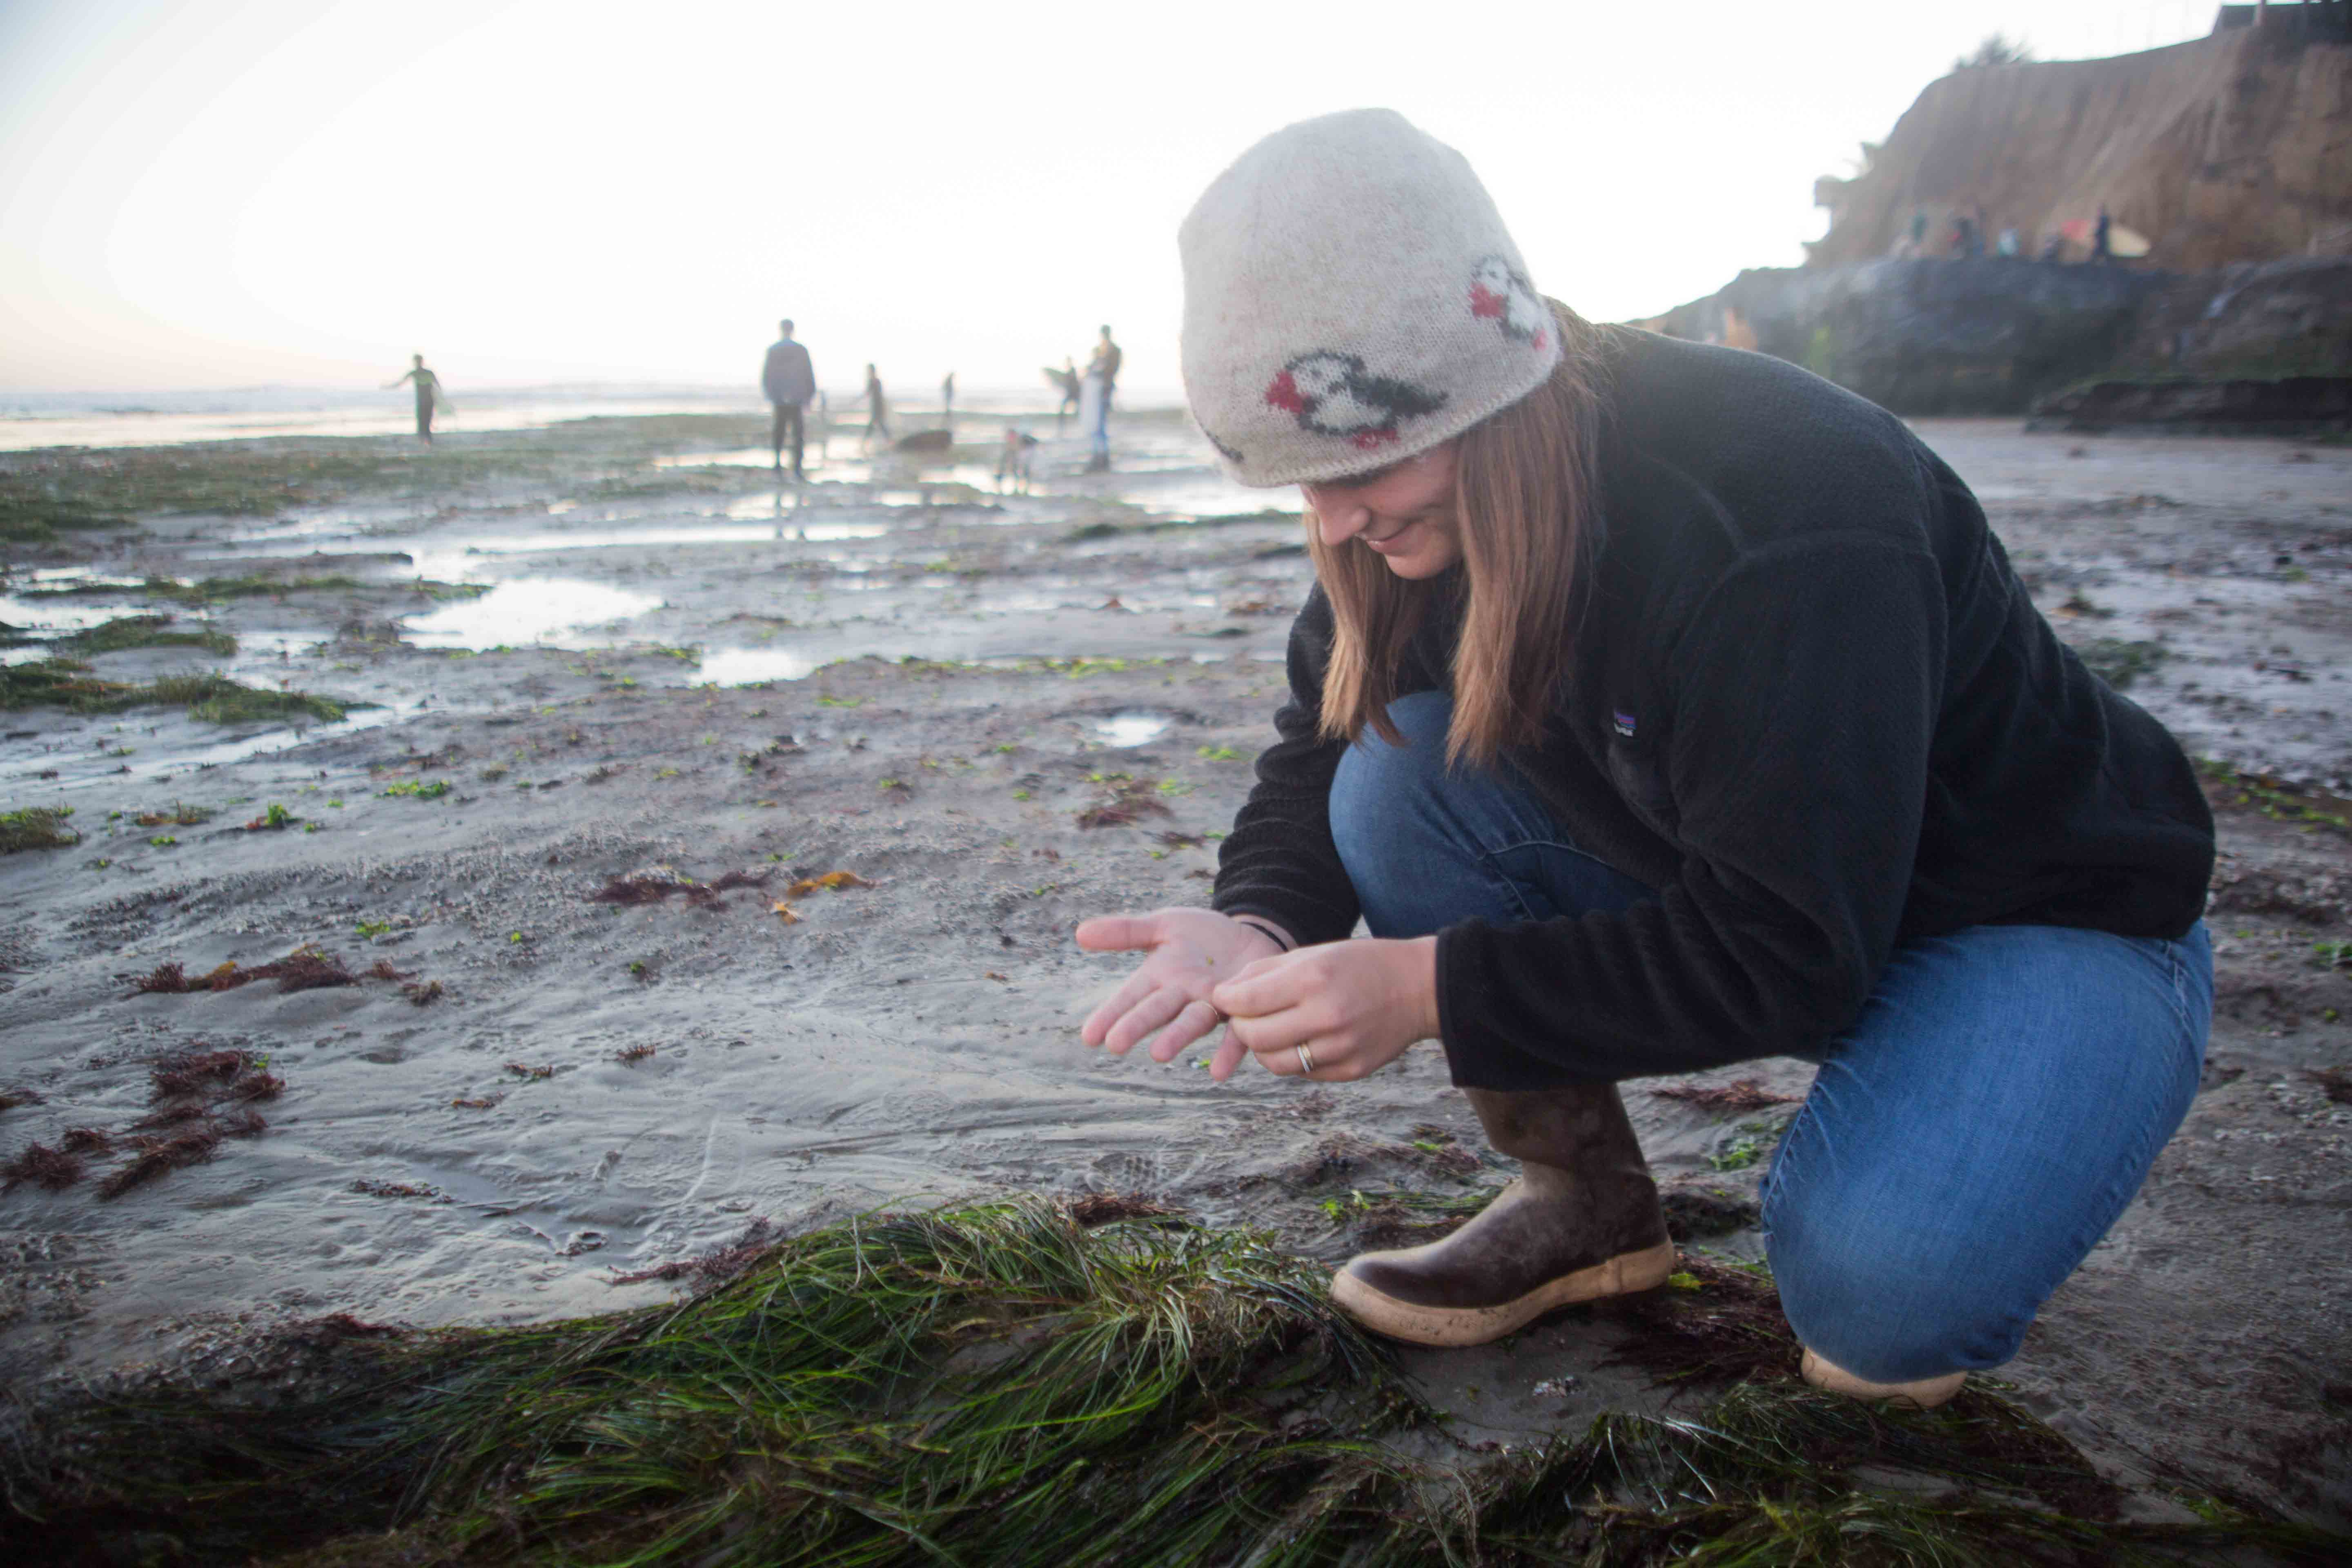 Underwater Meadows: The Seagrass of Eastcliff